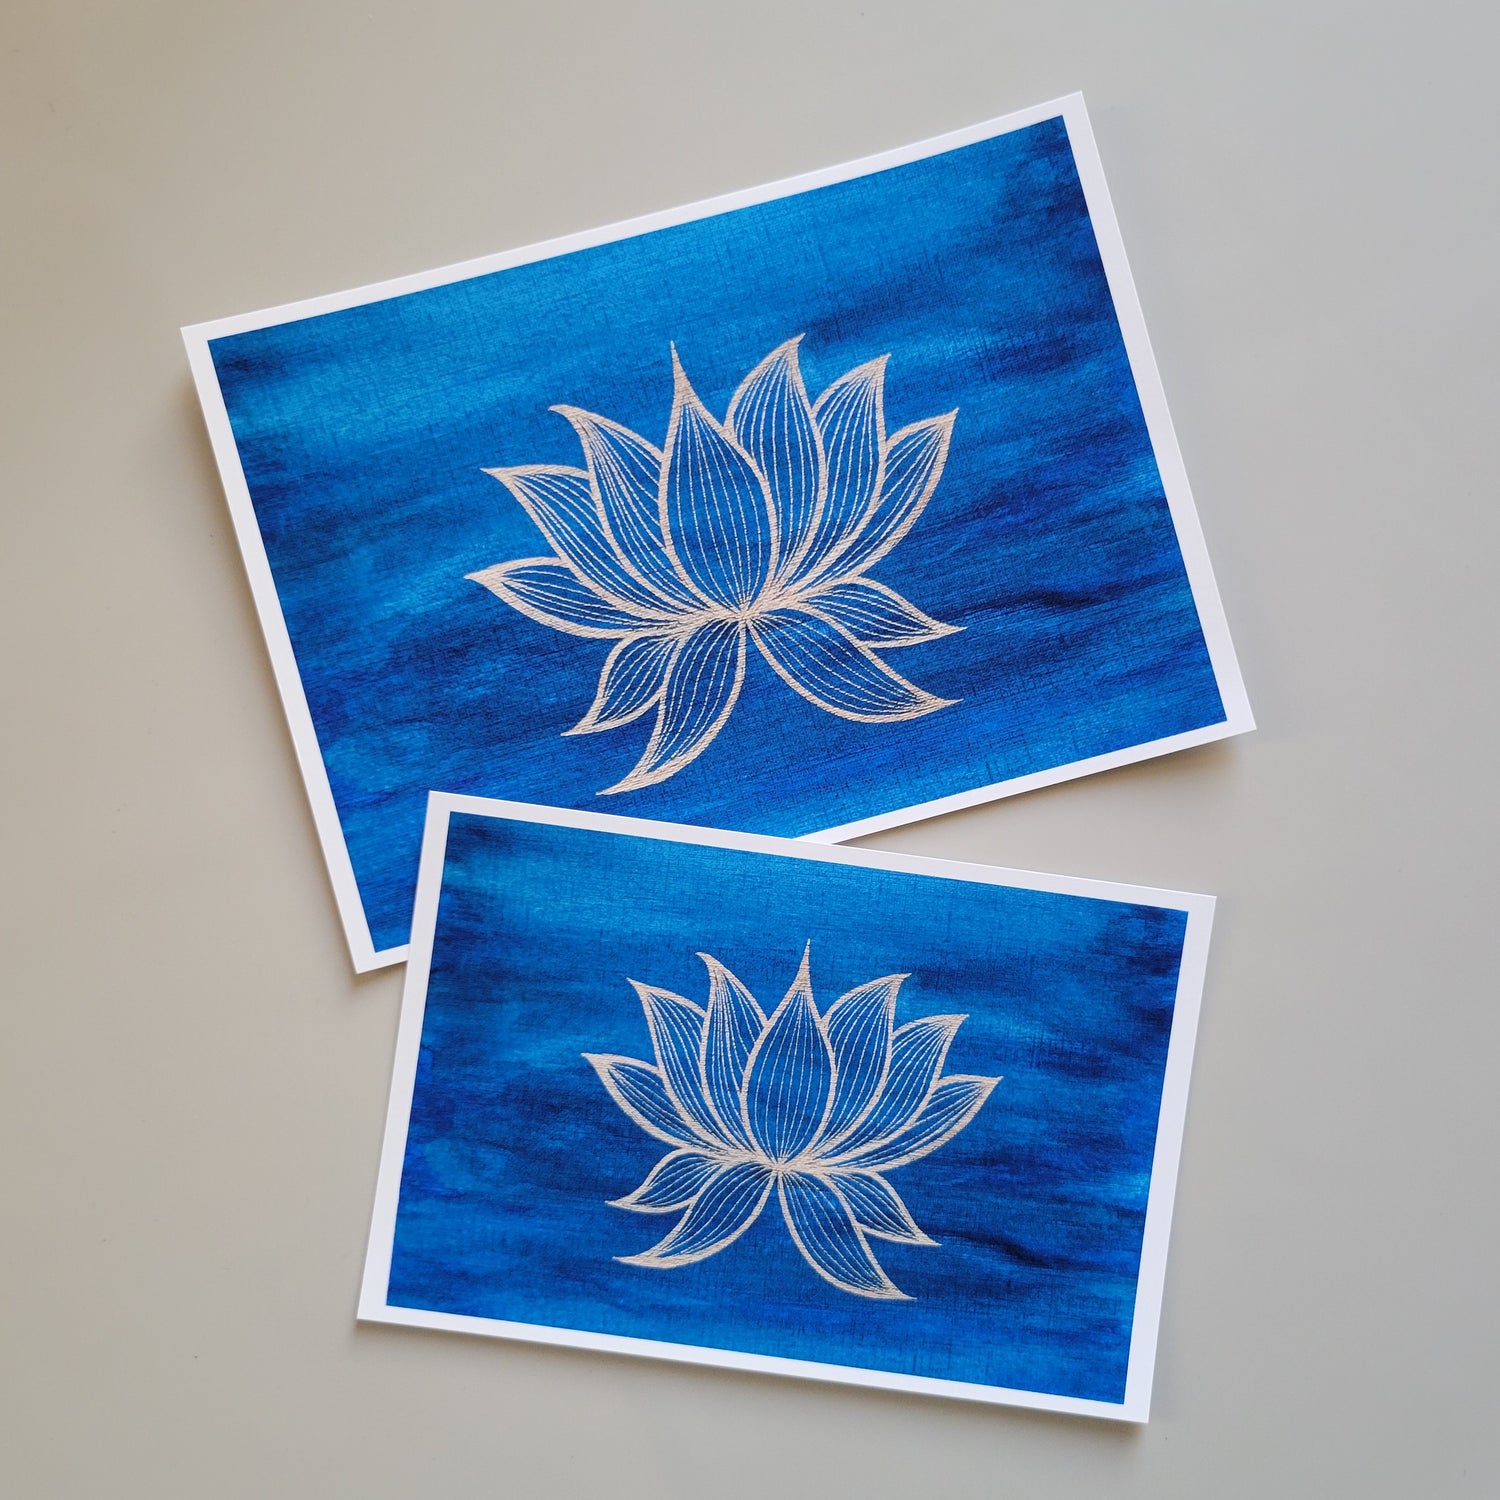 Art prints of a lotus blossom against a deep blue background